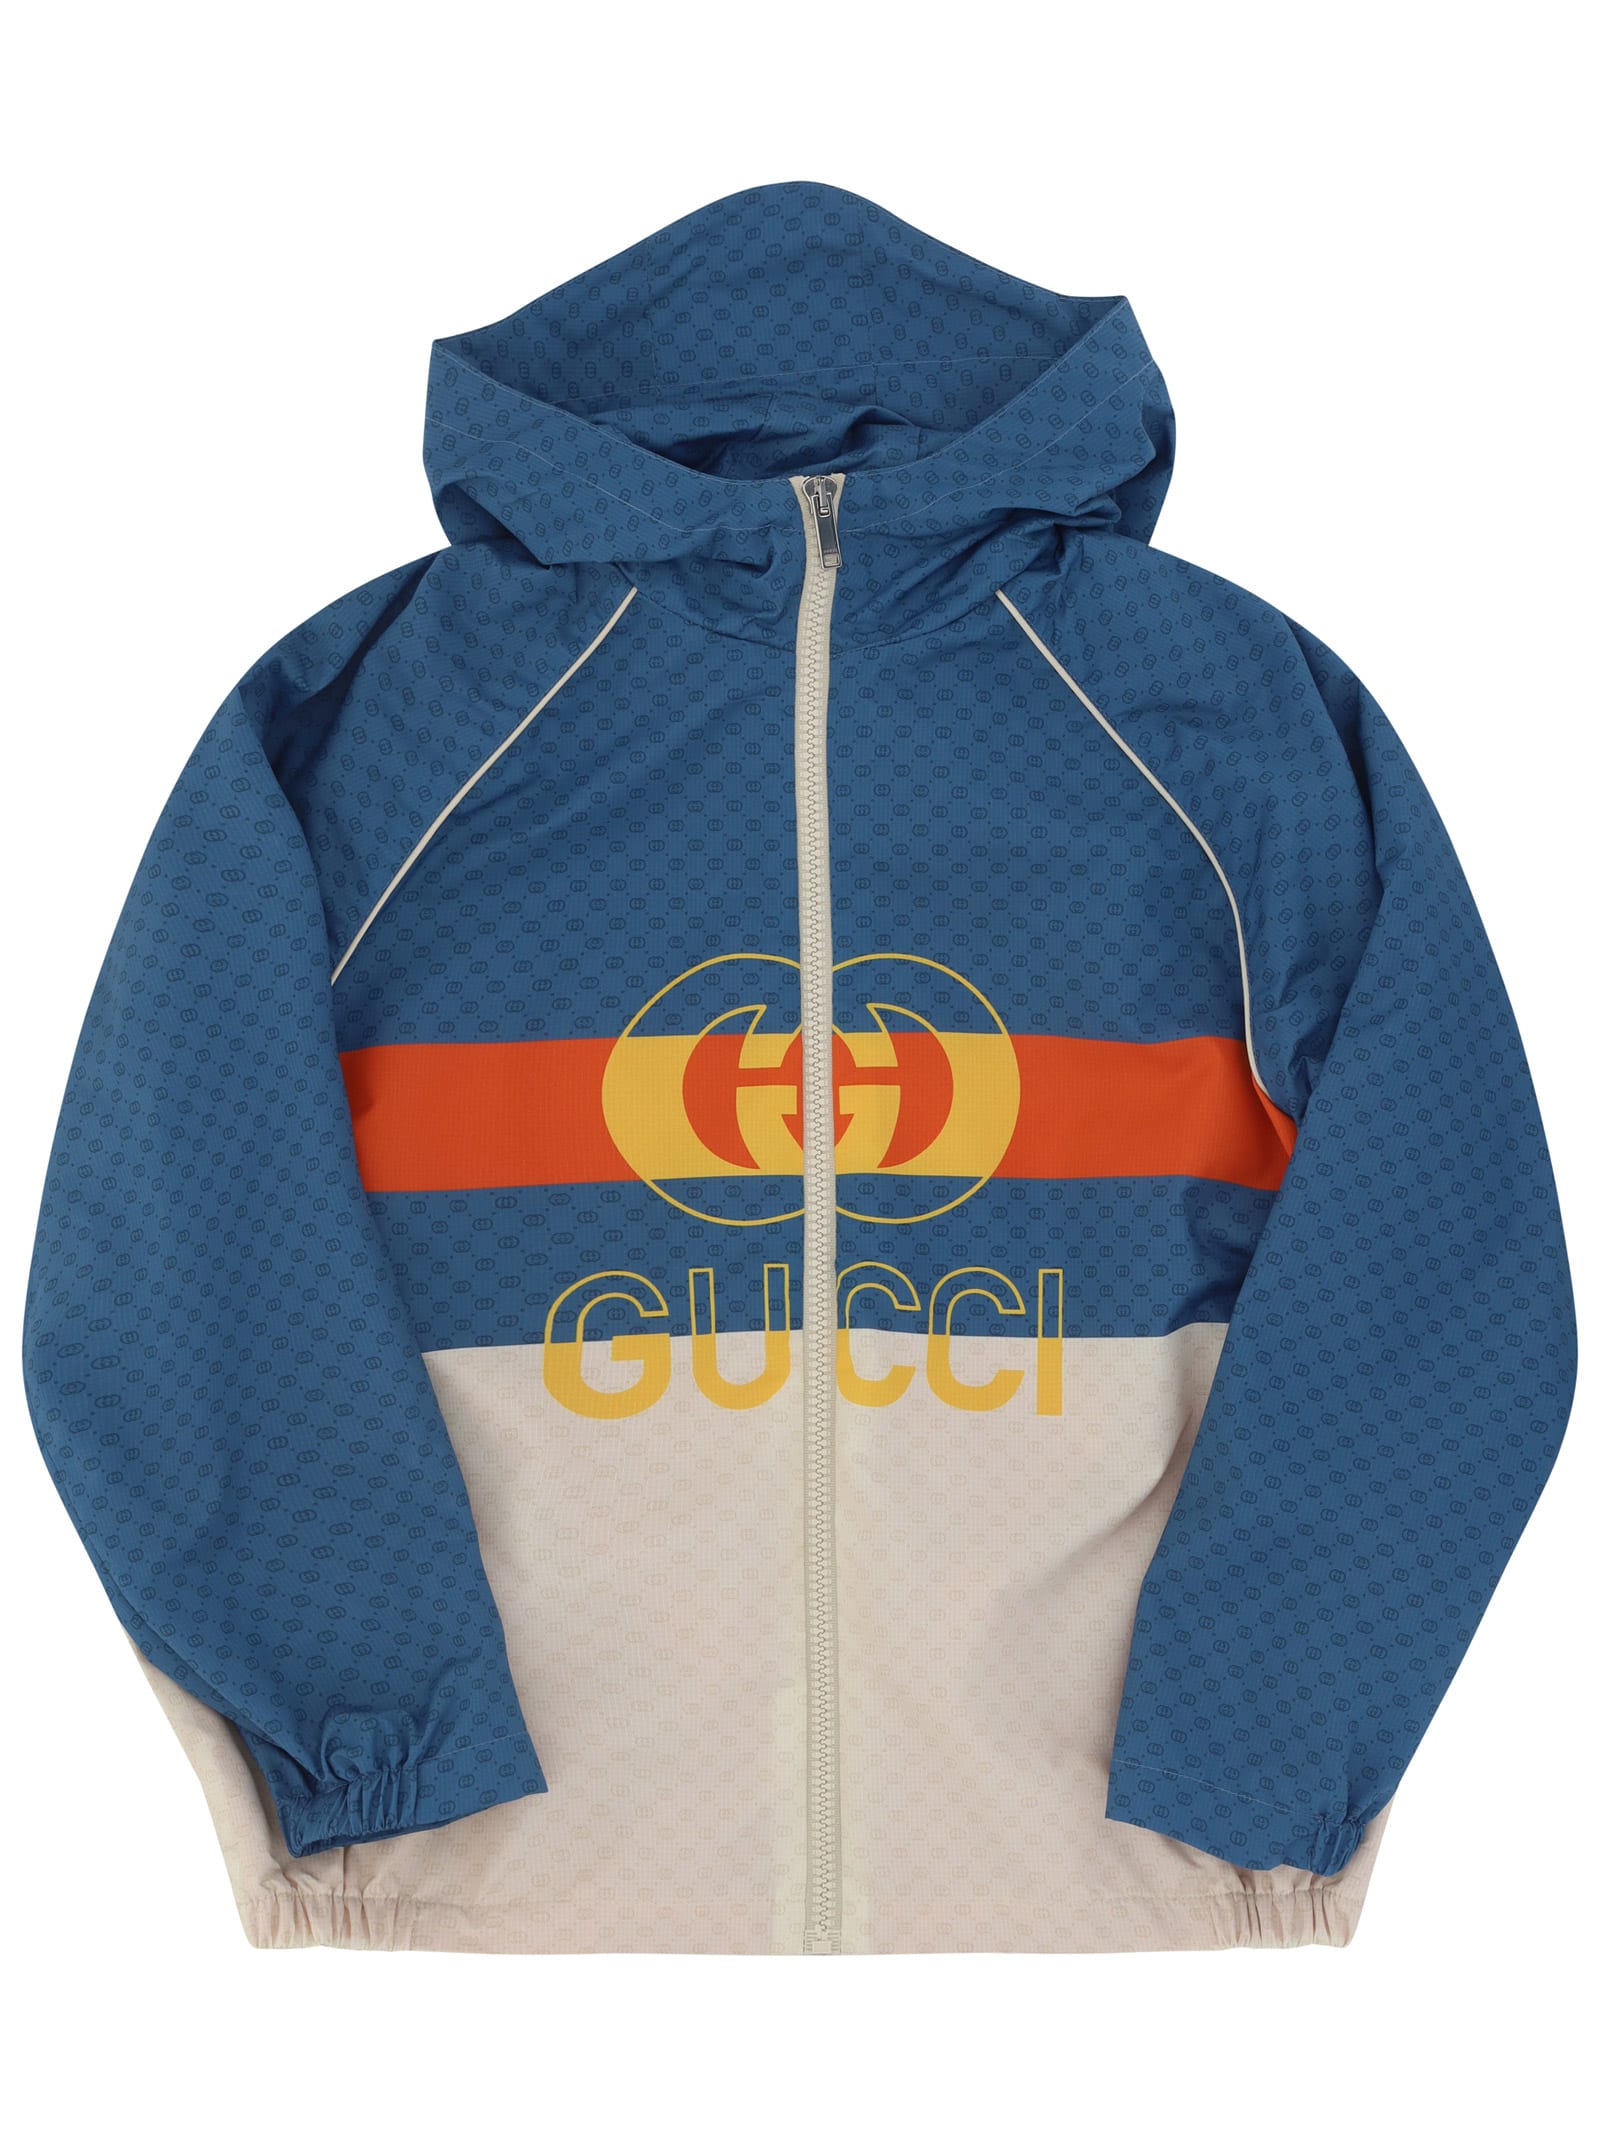 GUCCI WINDPROOF JACKET FOR BOY